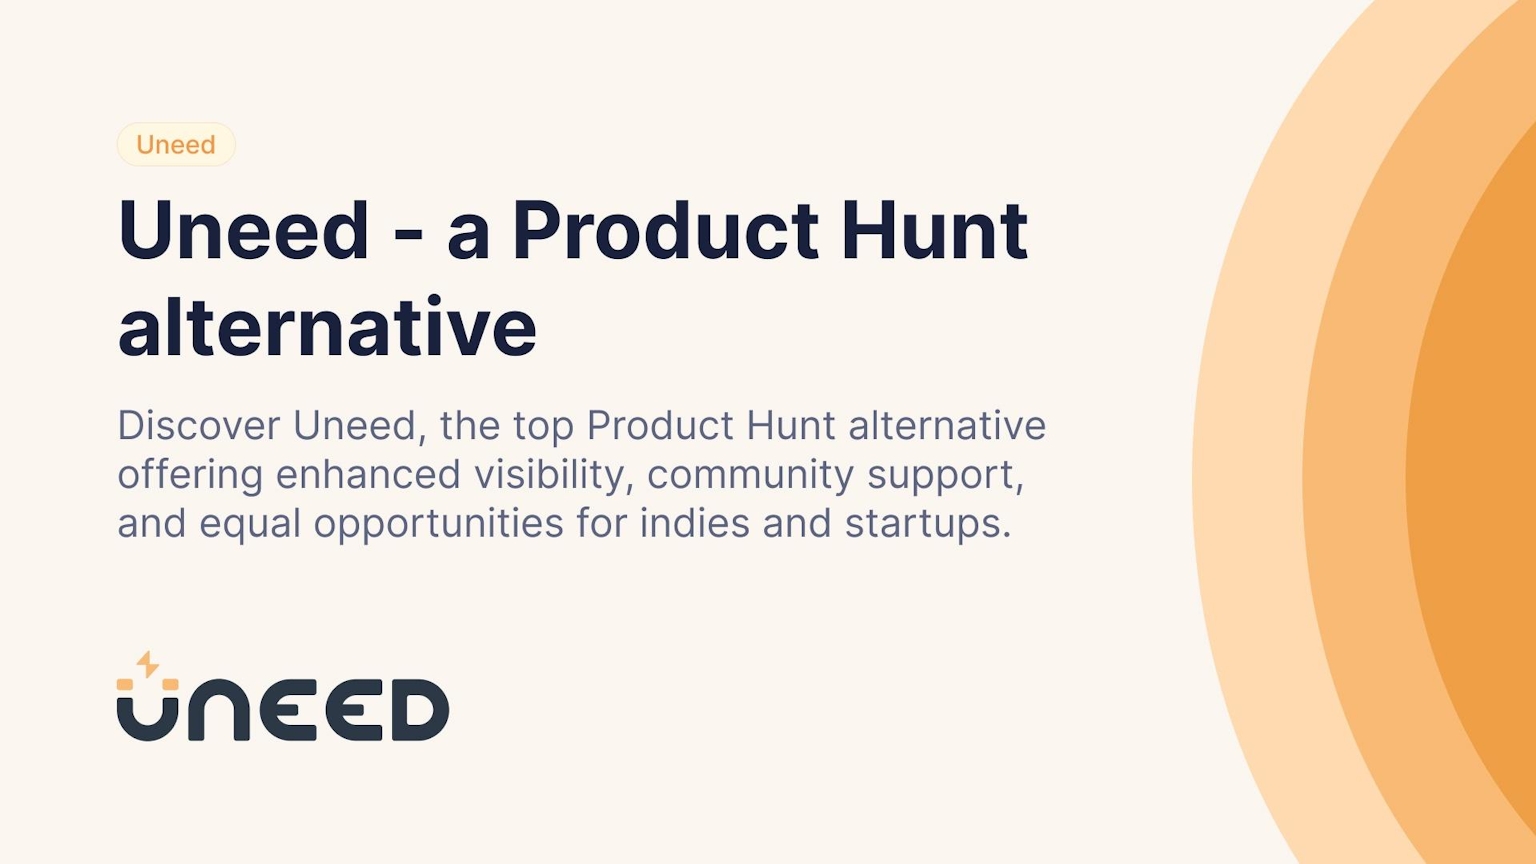 Uneed - a Product Hunt alternative